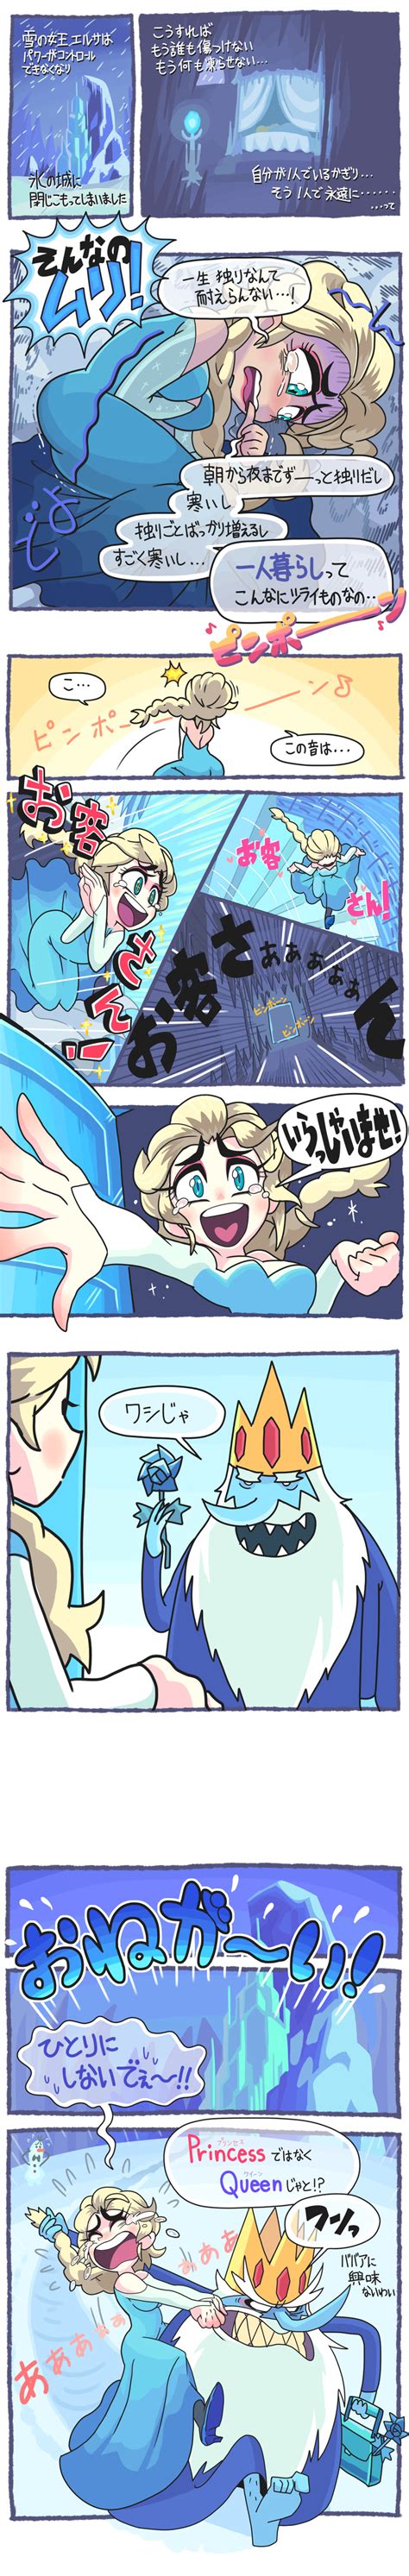 Elsa Olaf And Ice King Frozen And 1 More Drawn By Gashi Gashi